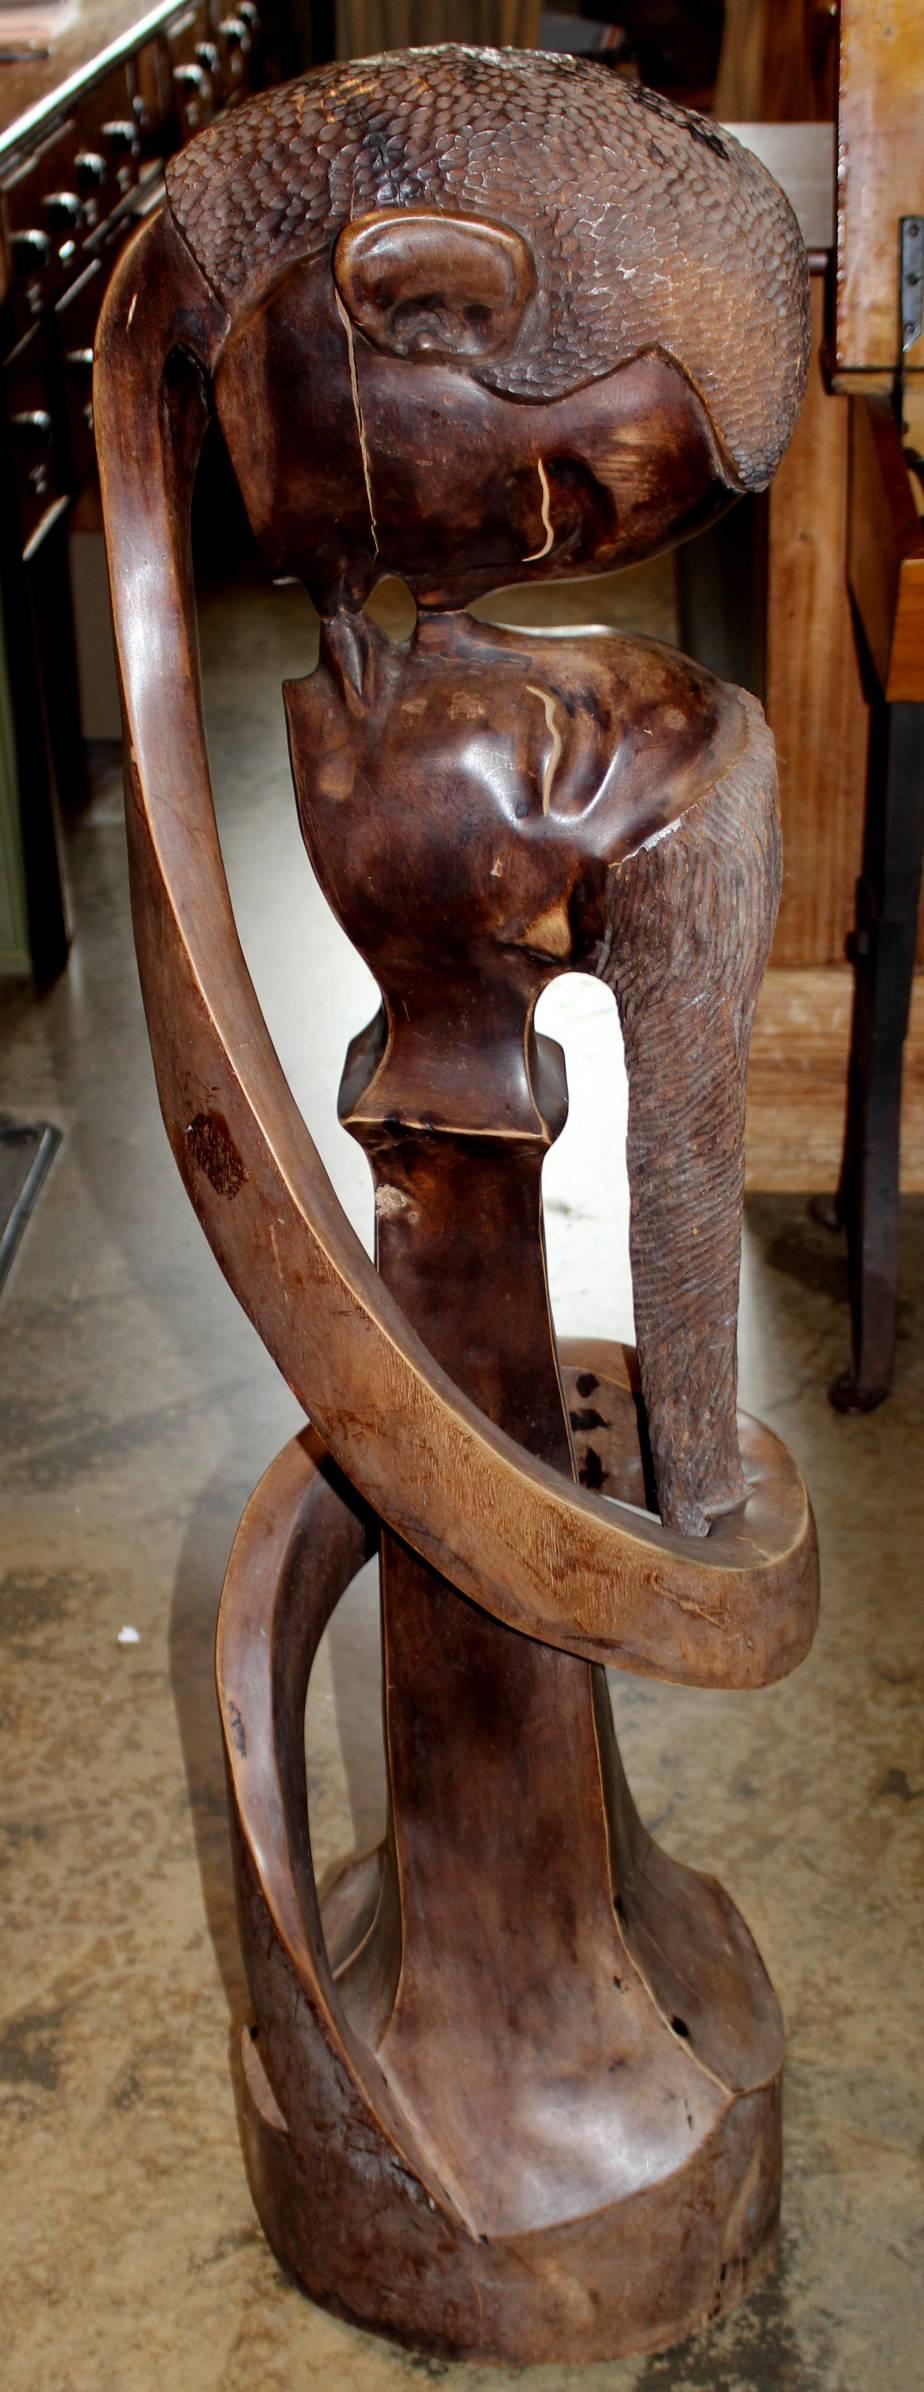 A nicely carved African hardwood abstract statue of a man and woman kissing, dating to the 20th century, with nice form, detail, and patina.